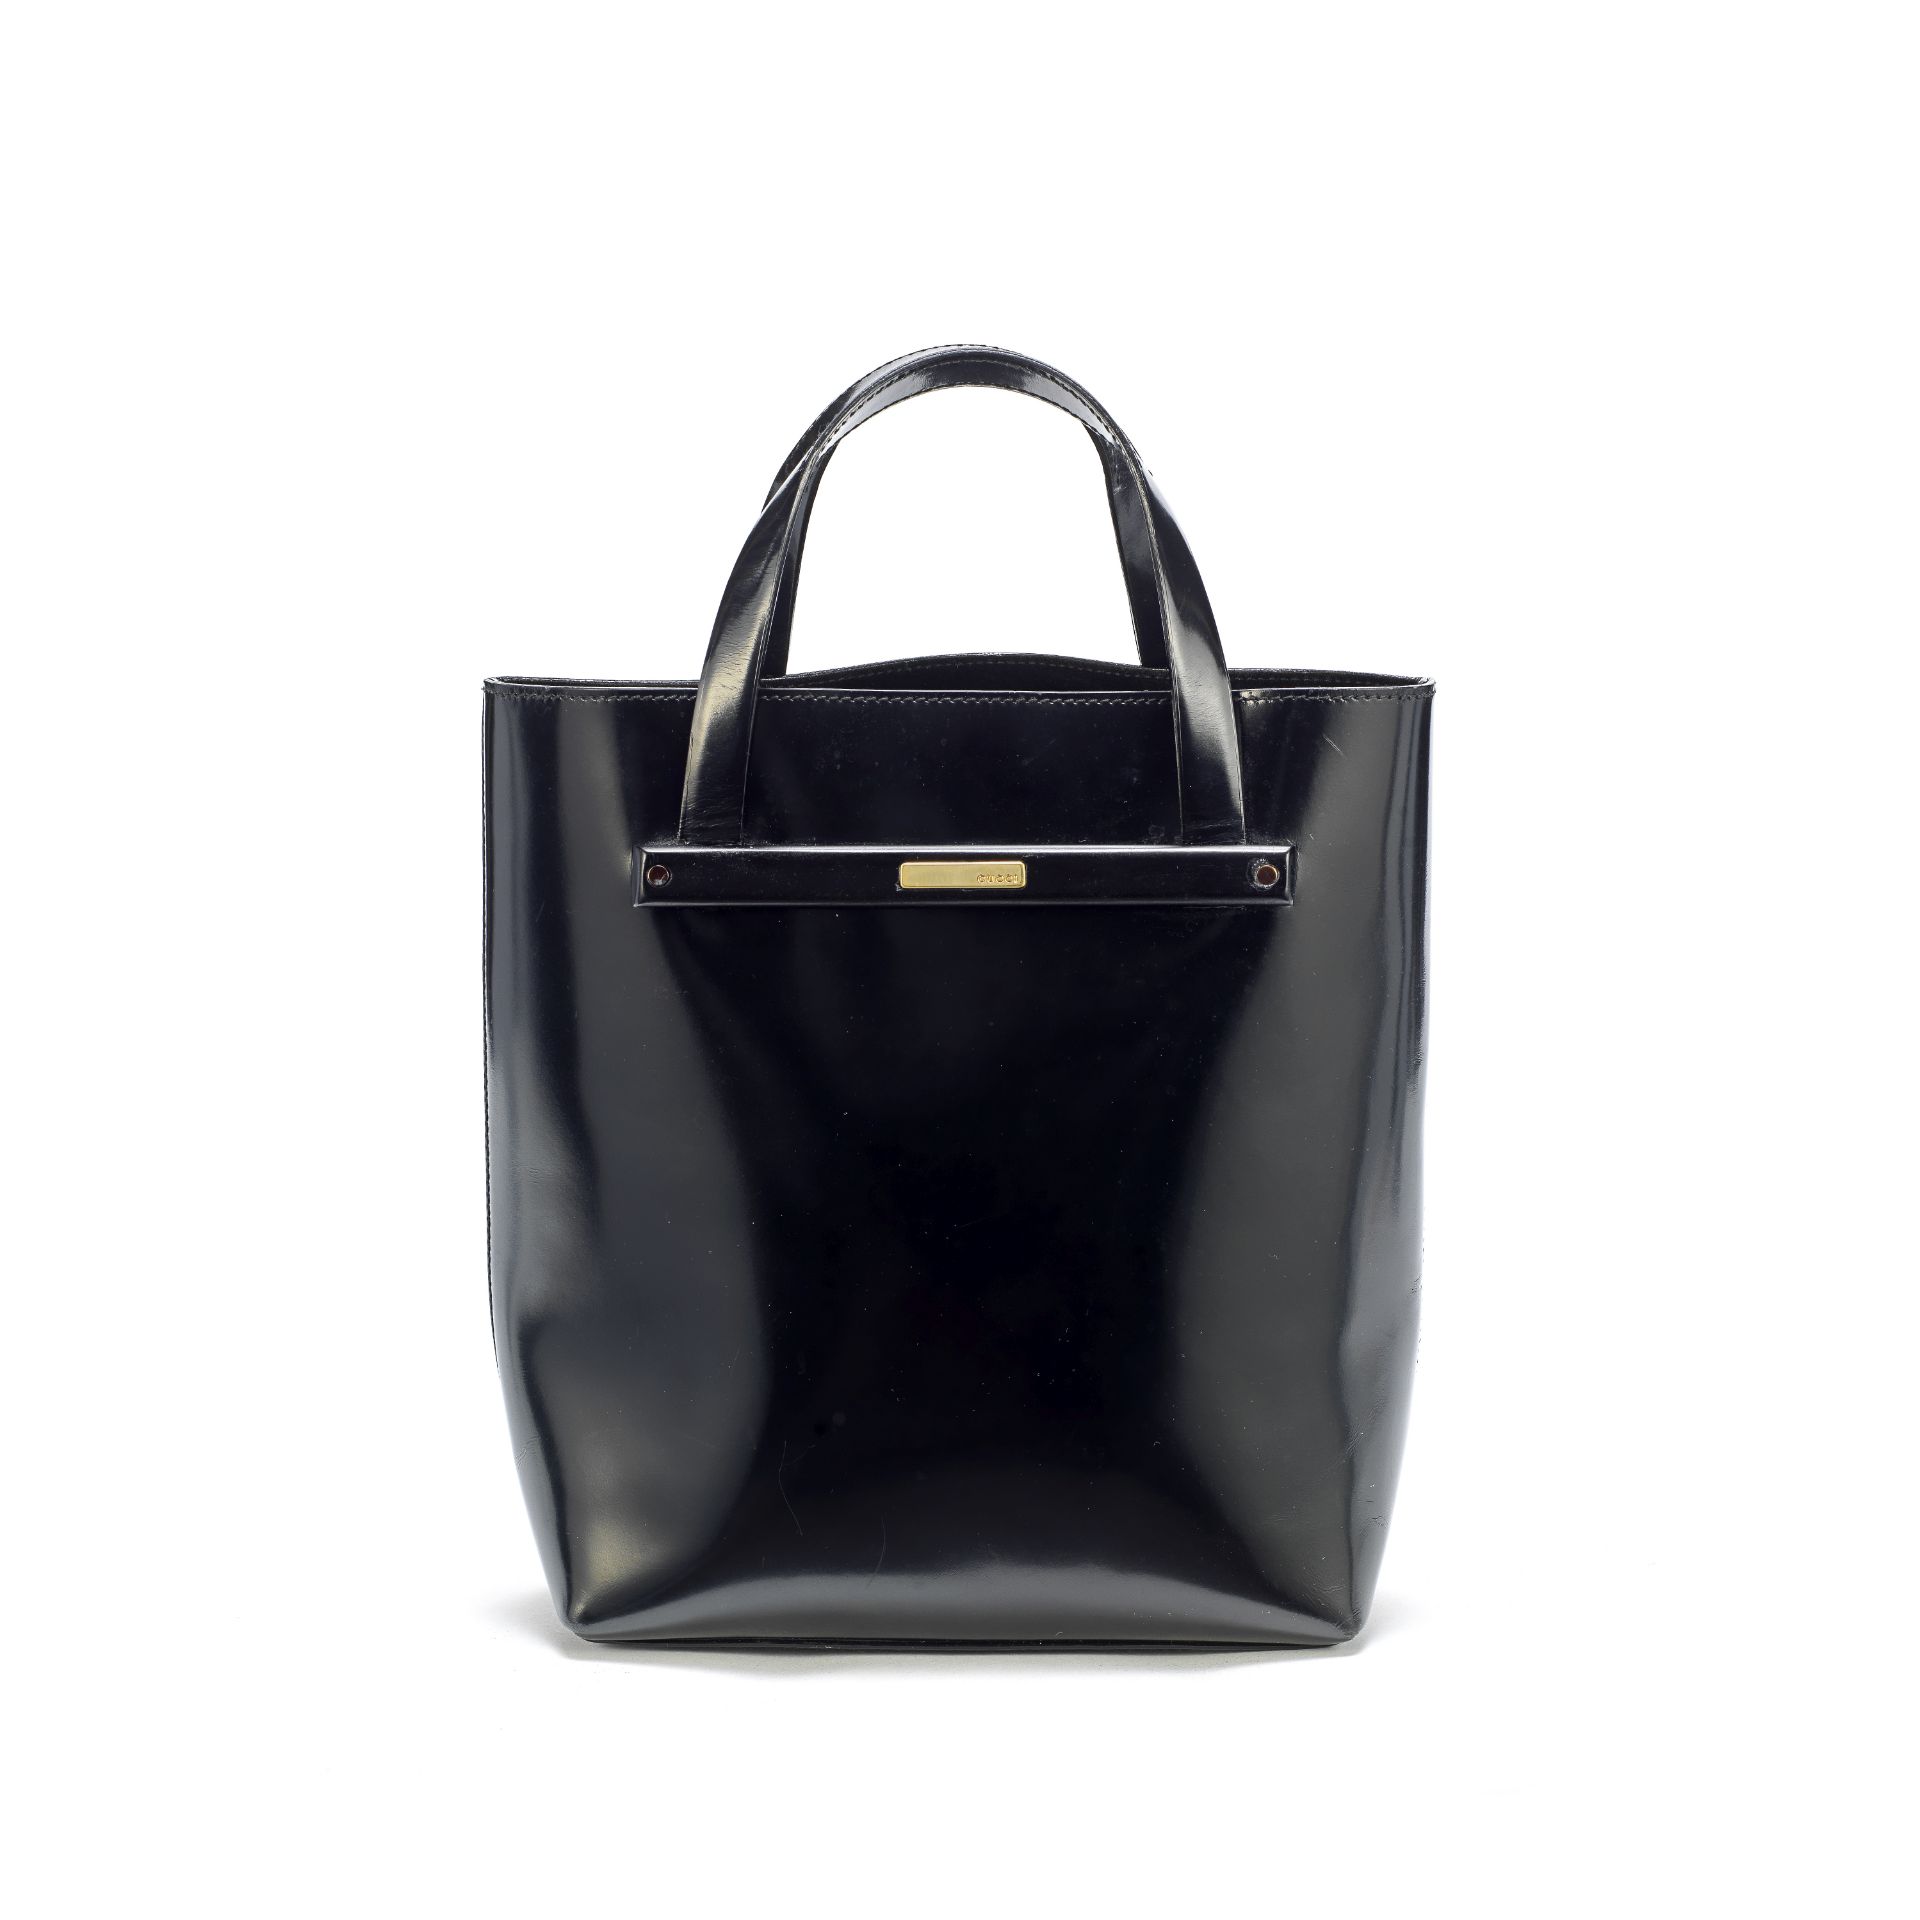 Small Black Patent Tote, Tom Ford for Gucci, 2000s, (Includes internal pouch and dust bag)